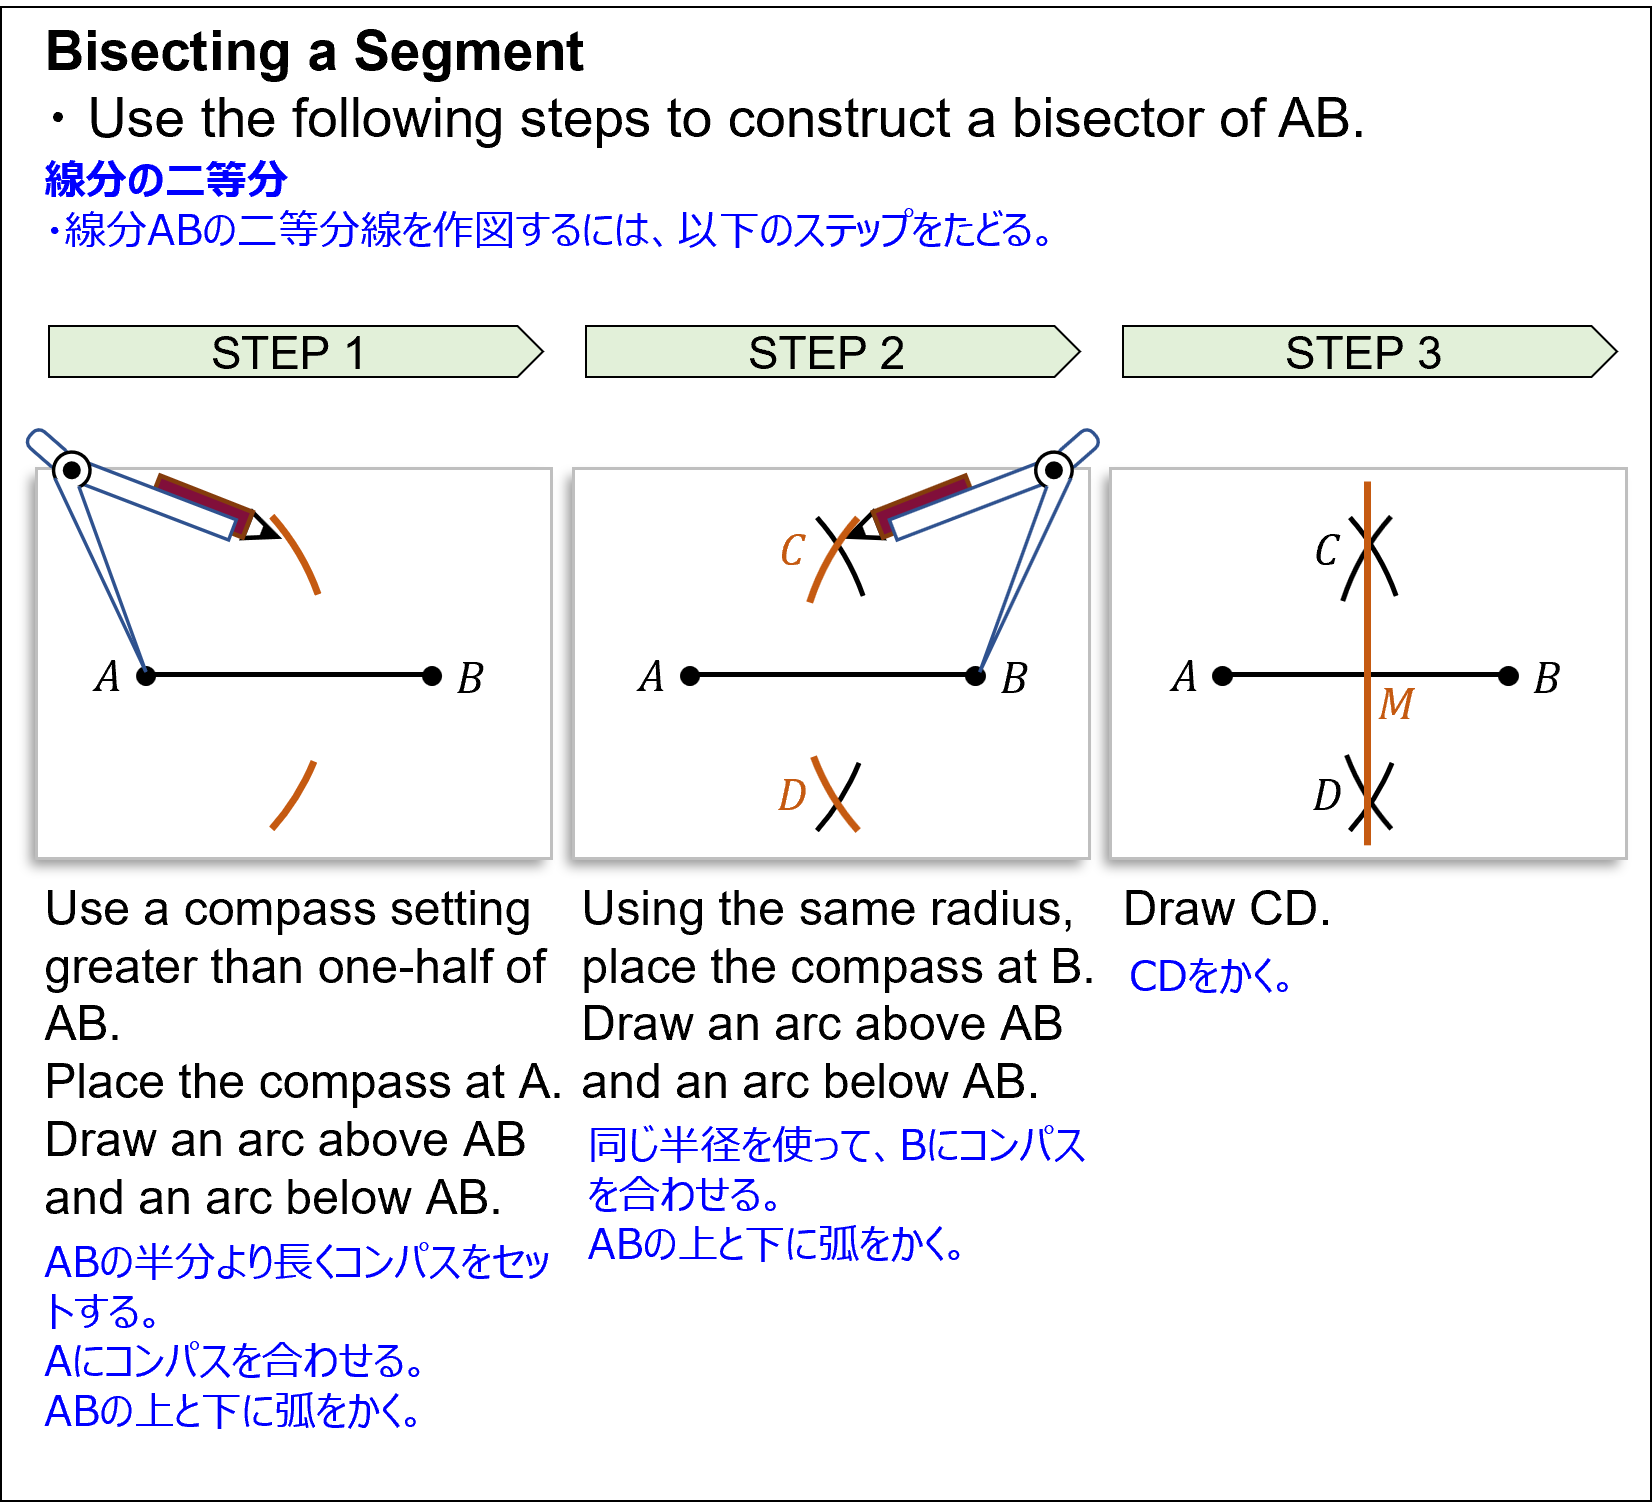 Illustrating how to construct a bisector